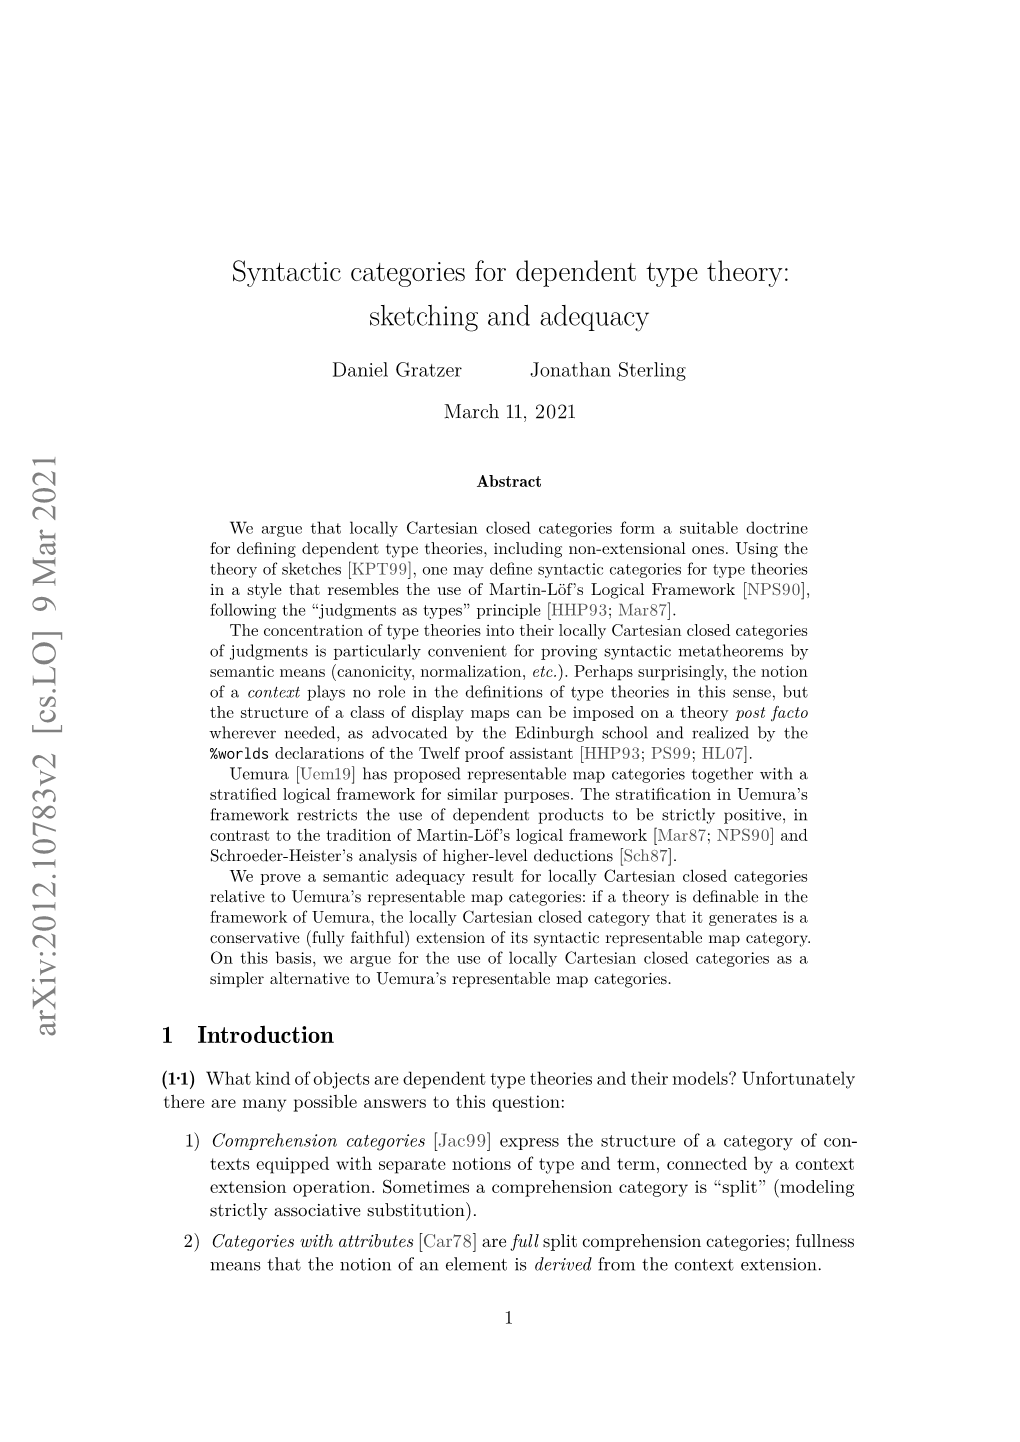 Syntactic Categories for Dependent Type Theory: Sketching and Adequacy